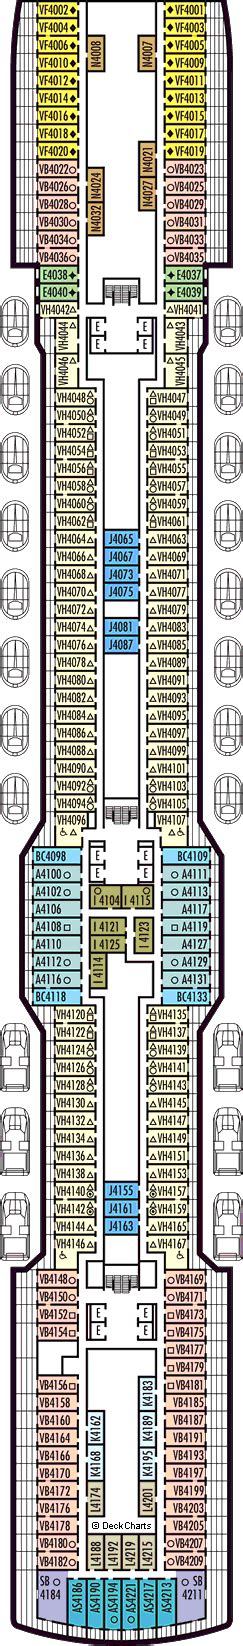 holland america nieuw statendam deck plans ship layout staterooms map cruise critic